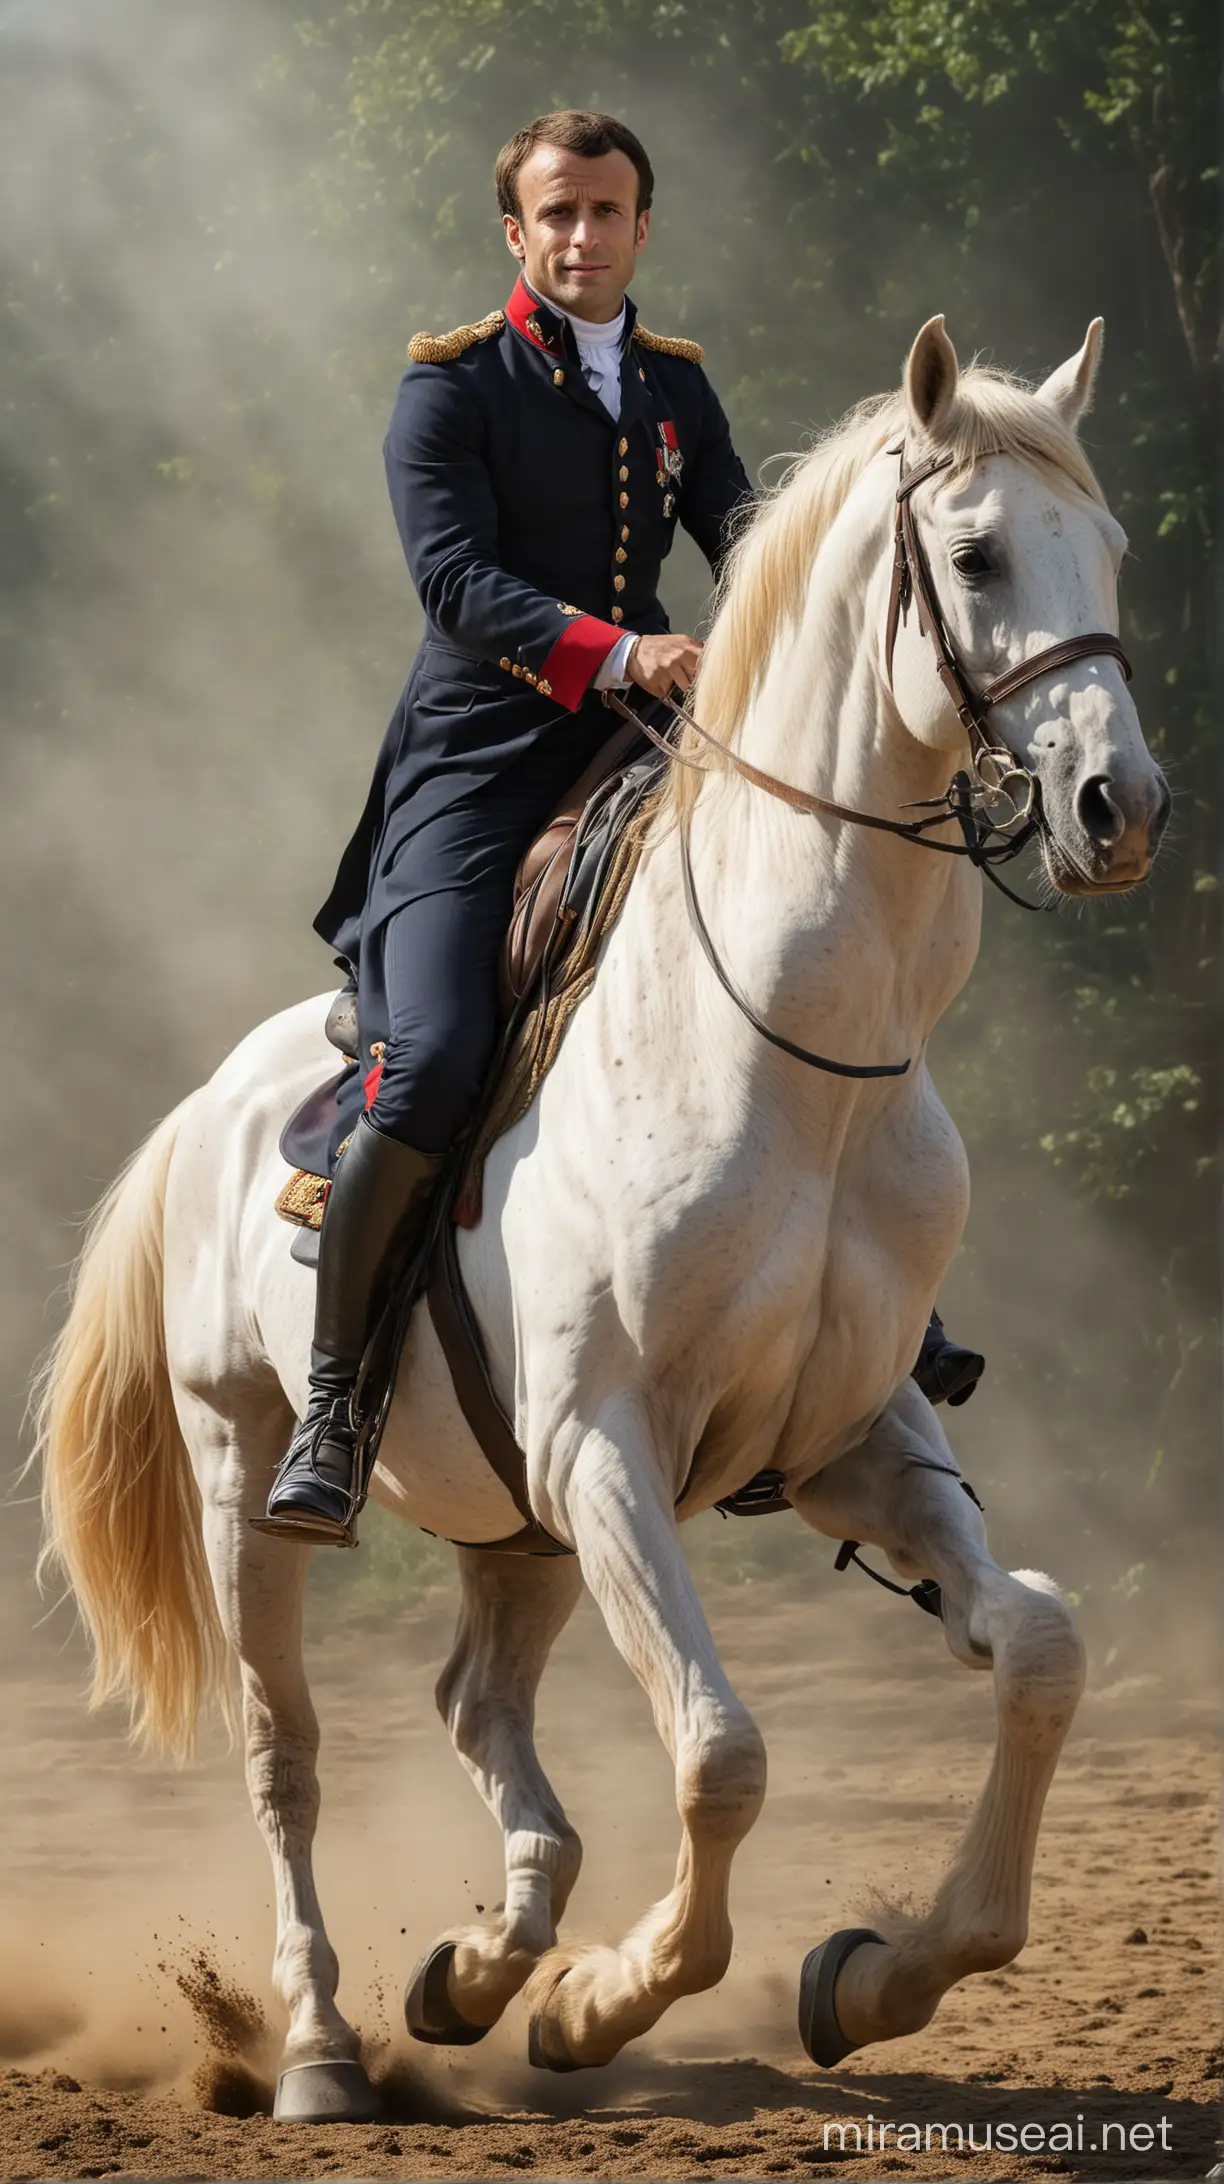 Emmanuel Macron on a horse, like Napoleon. Dramatic light. The horse is a bit dynamic like in a painting.